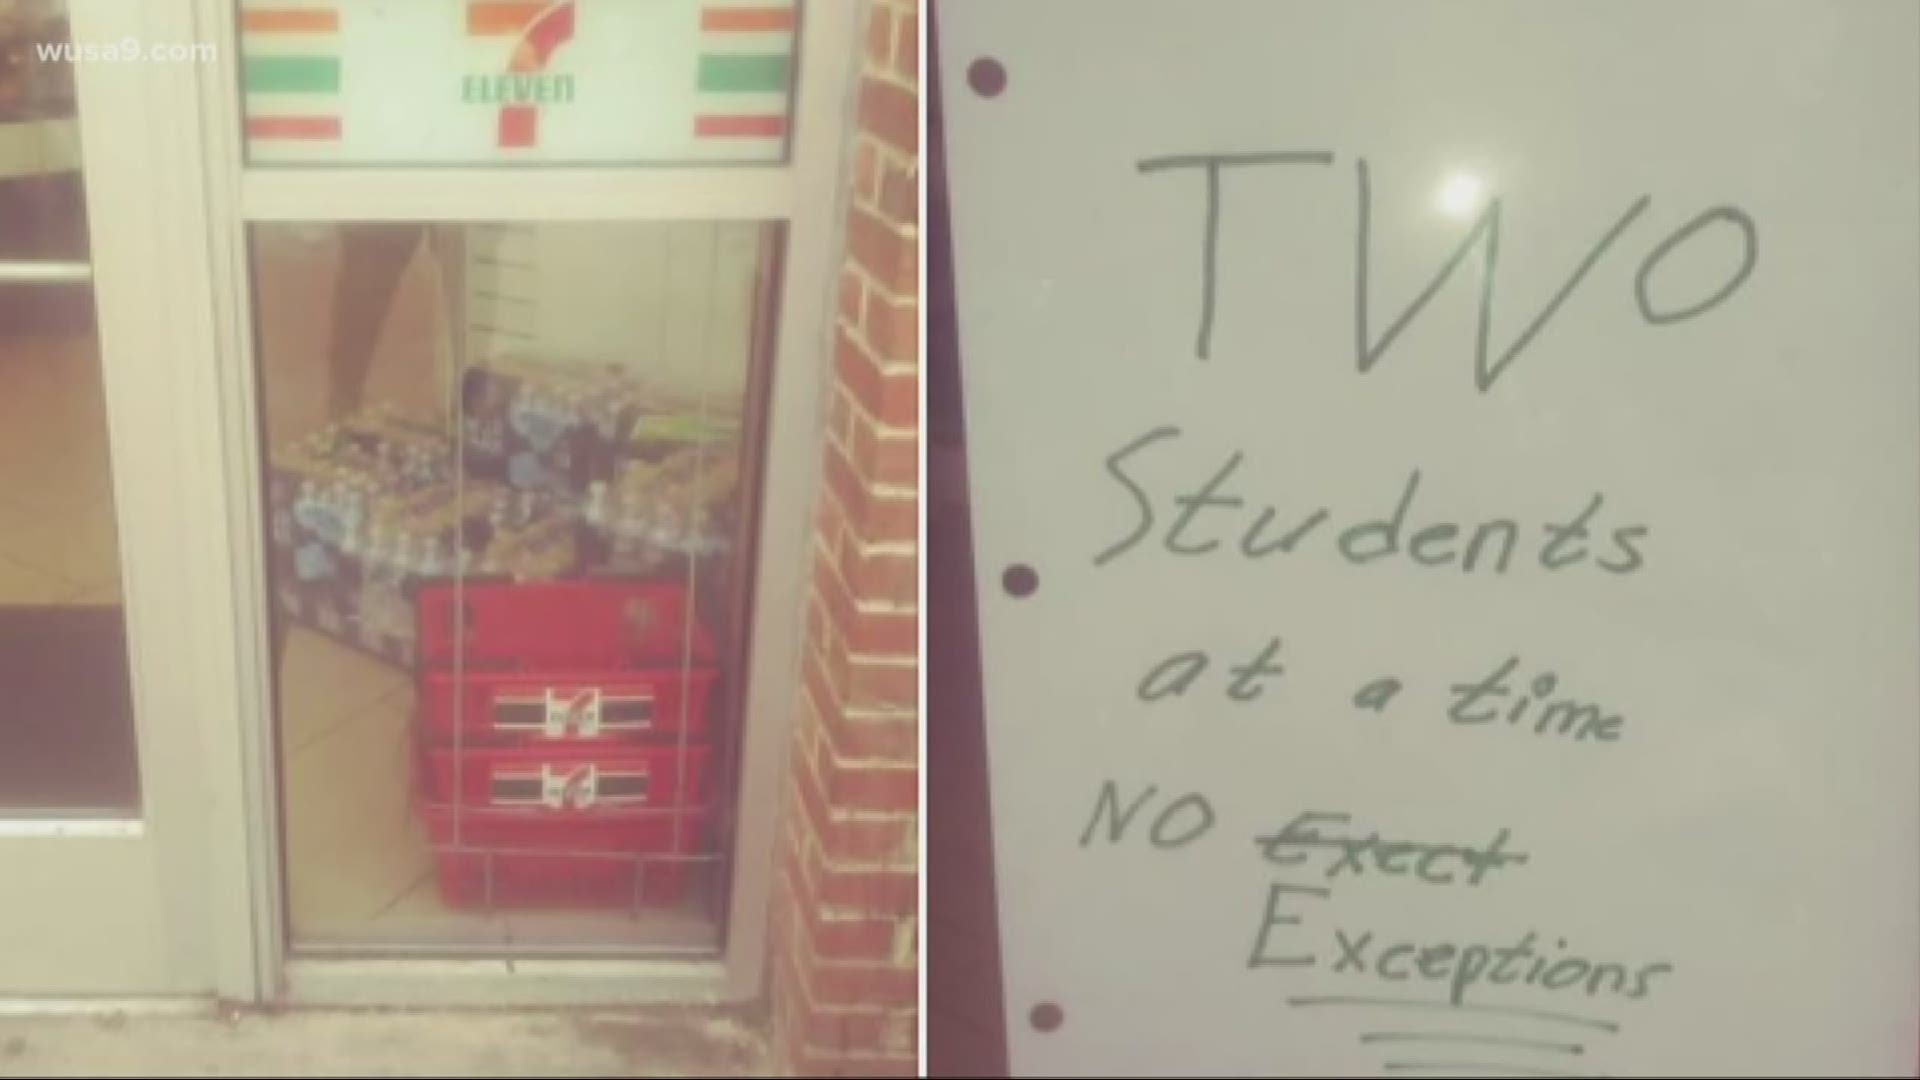 A handwritten sign on the door of an Anacostia 7-Eleven has stirred big controversy online. Some say there have been limits in both white and black neighborhoods.